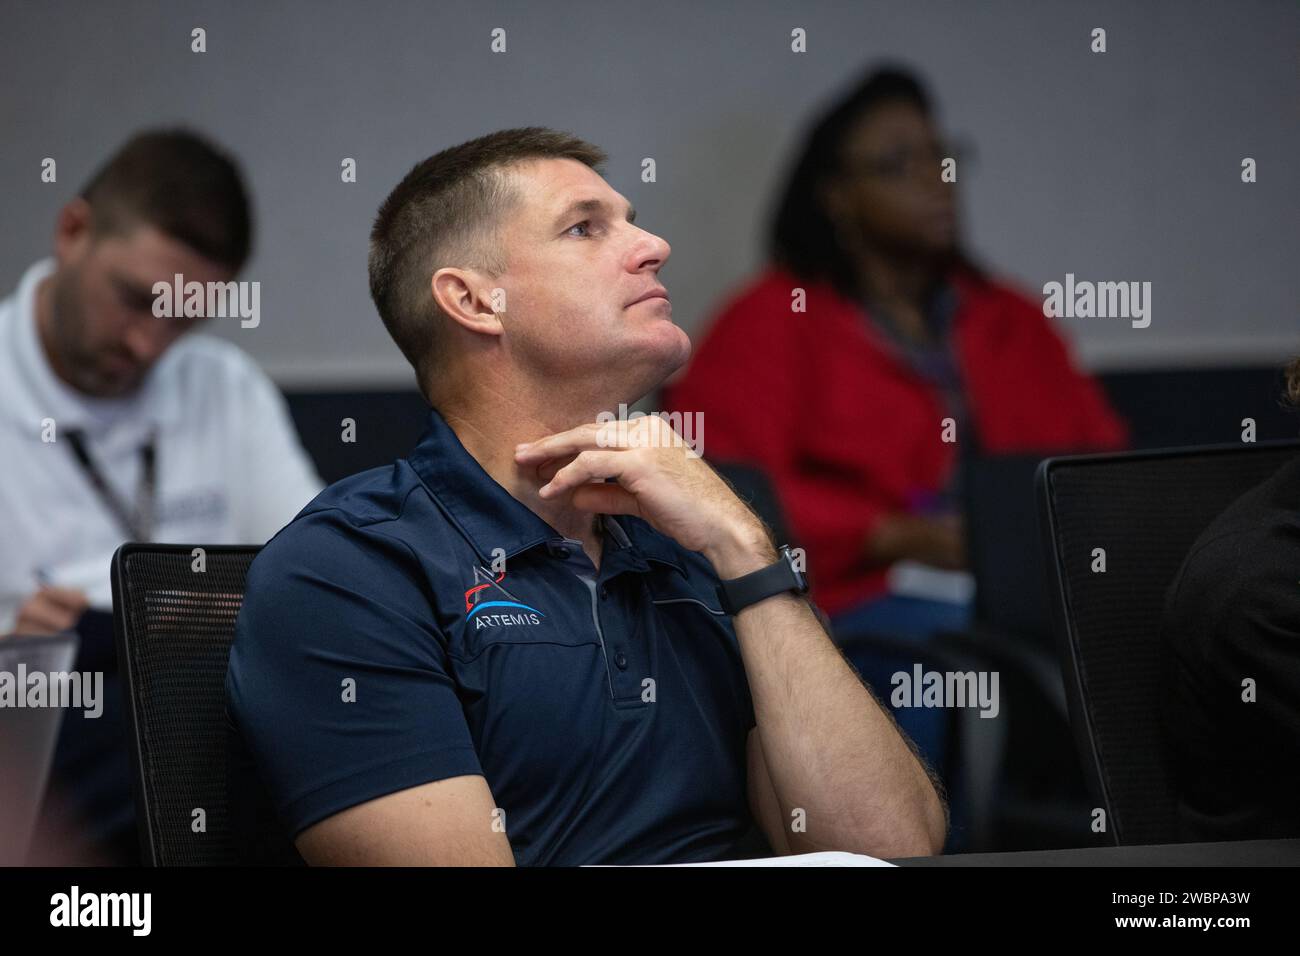 Artemis II crew member CSA (Canadian Space Agency) astronaut Jeremy Hansen participates in a pre-task briefing on Tuesday, Sept. 19, 2023, held in the Rocco A. Petrone Launch Control Center at NASA’s Kennedy Space Center in Florida. The briefing allows teams to collaborate ahead of a series of integrated system verification and validation tests conducted at Kennedy to evaluate the readiness of the crew and ground equipment ahead of launch day. Stock Photo